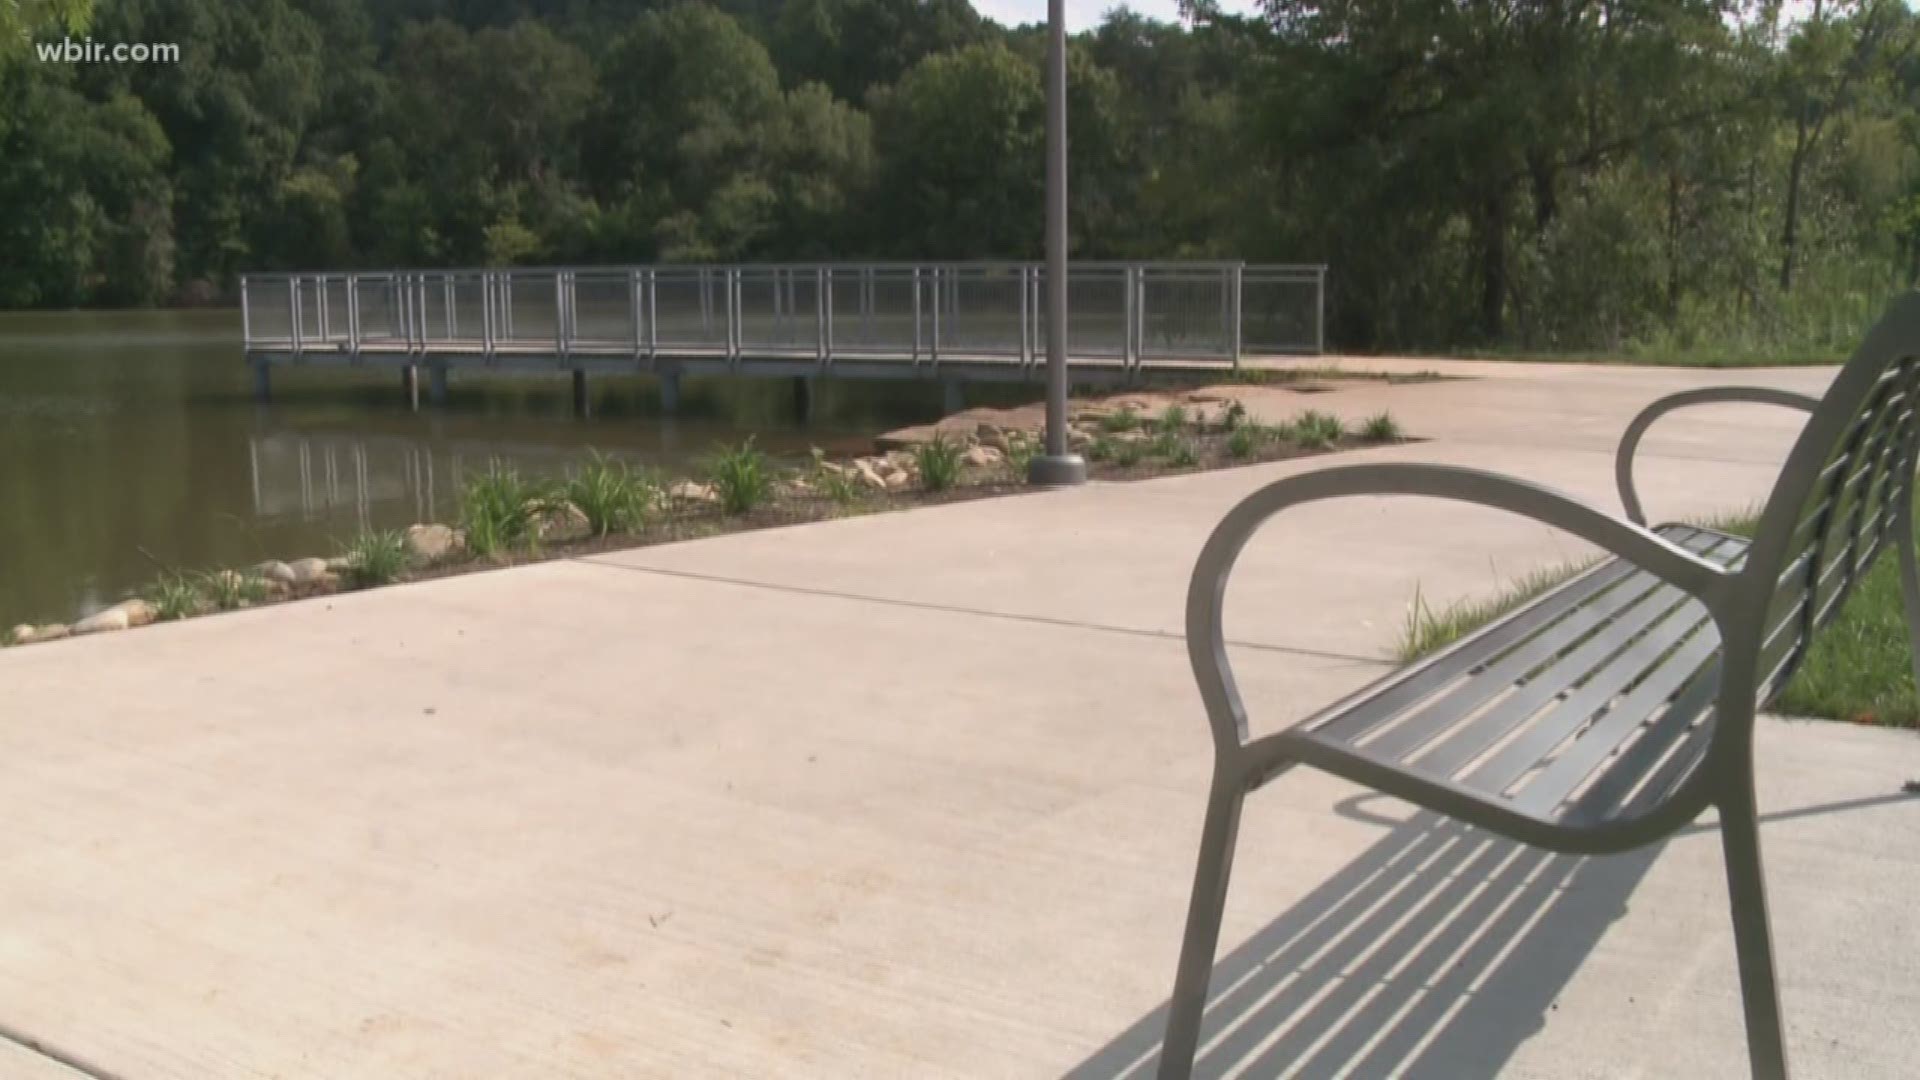 The $25 million dollar phase of projects was funded and completed by the Lakeshore Park Board.